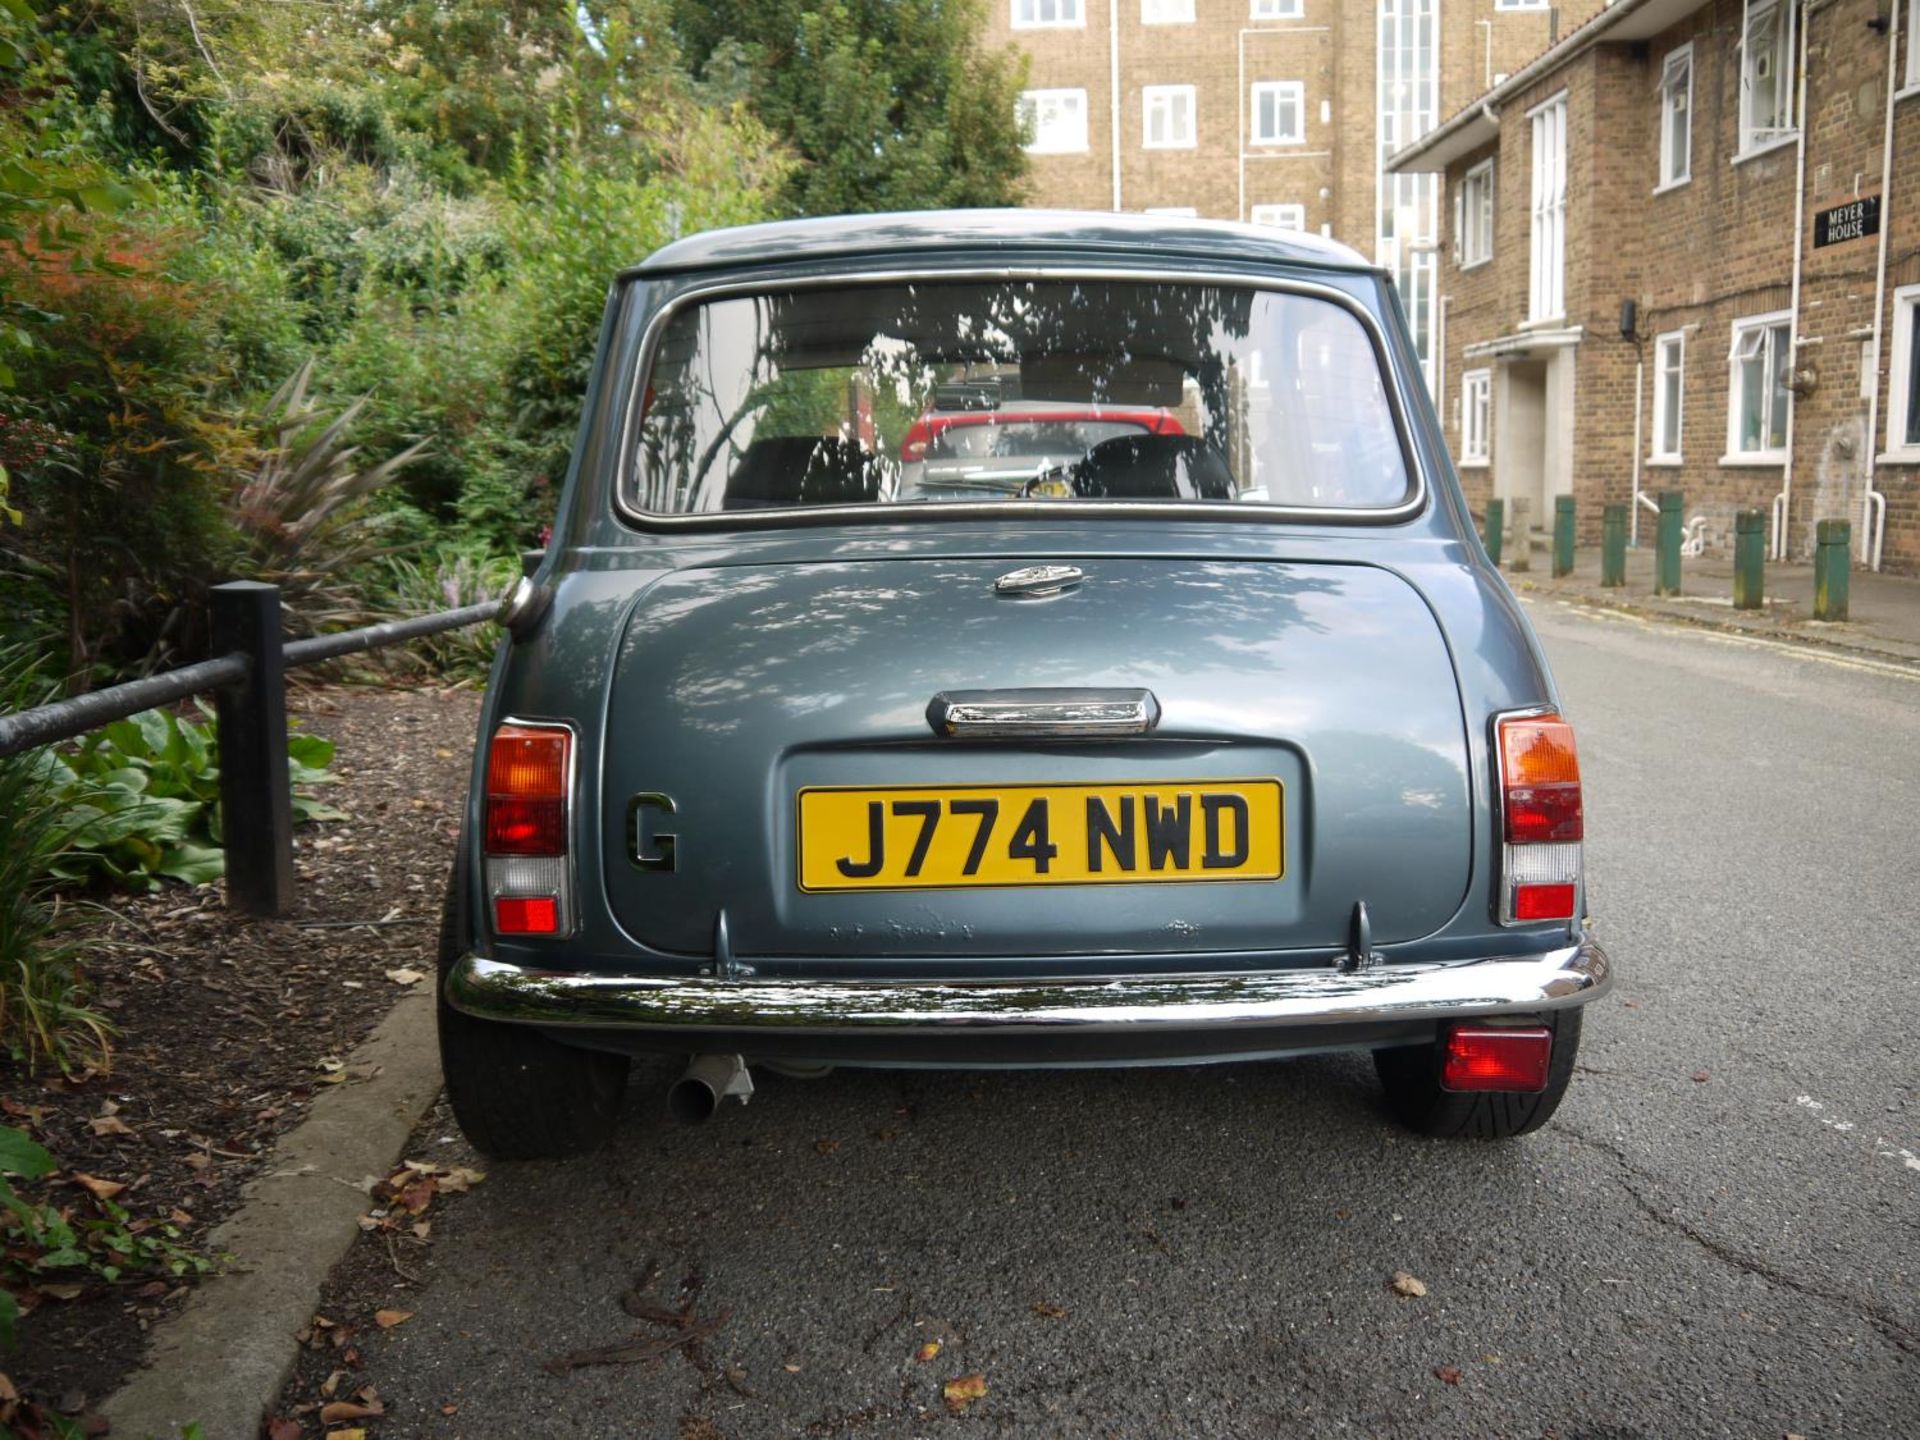 1991 ROVER MINI NEON Registration Number: J774 NWD Recorded Mileage: 58,000 miles Chassis Number: - Image 12 of 24